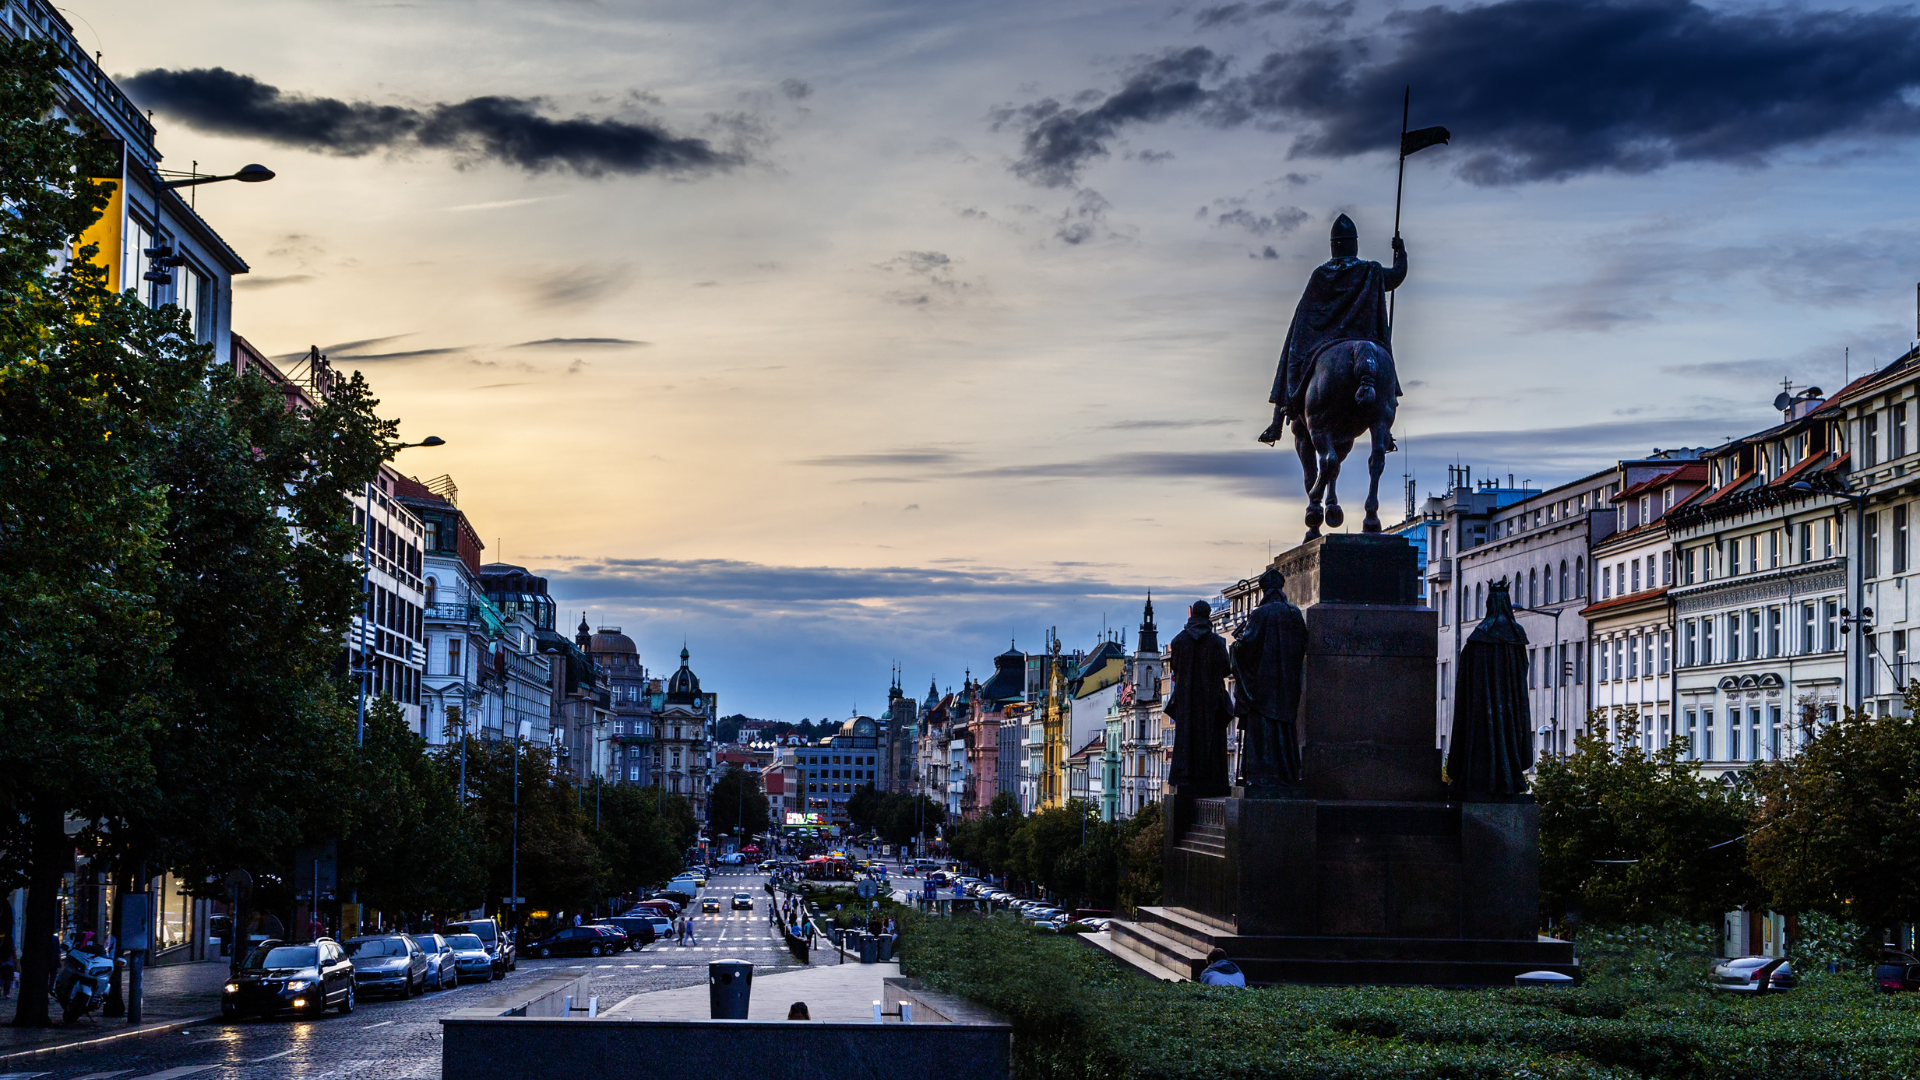 Wenceslas Square Tranquility at Sunset: An enchanting scene of Wenceslas Square, Prague, captured in the serene moments of a vivid sunset. The cold, calming colors of the evening sky provide a striking backdrop to the square's silhouette, adorned with a statue. The absence of crowds adds to the tranquility of this iconic location, allowing for a peaceful appreciation of its historic beauty. 